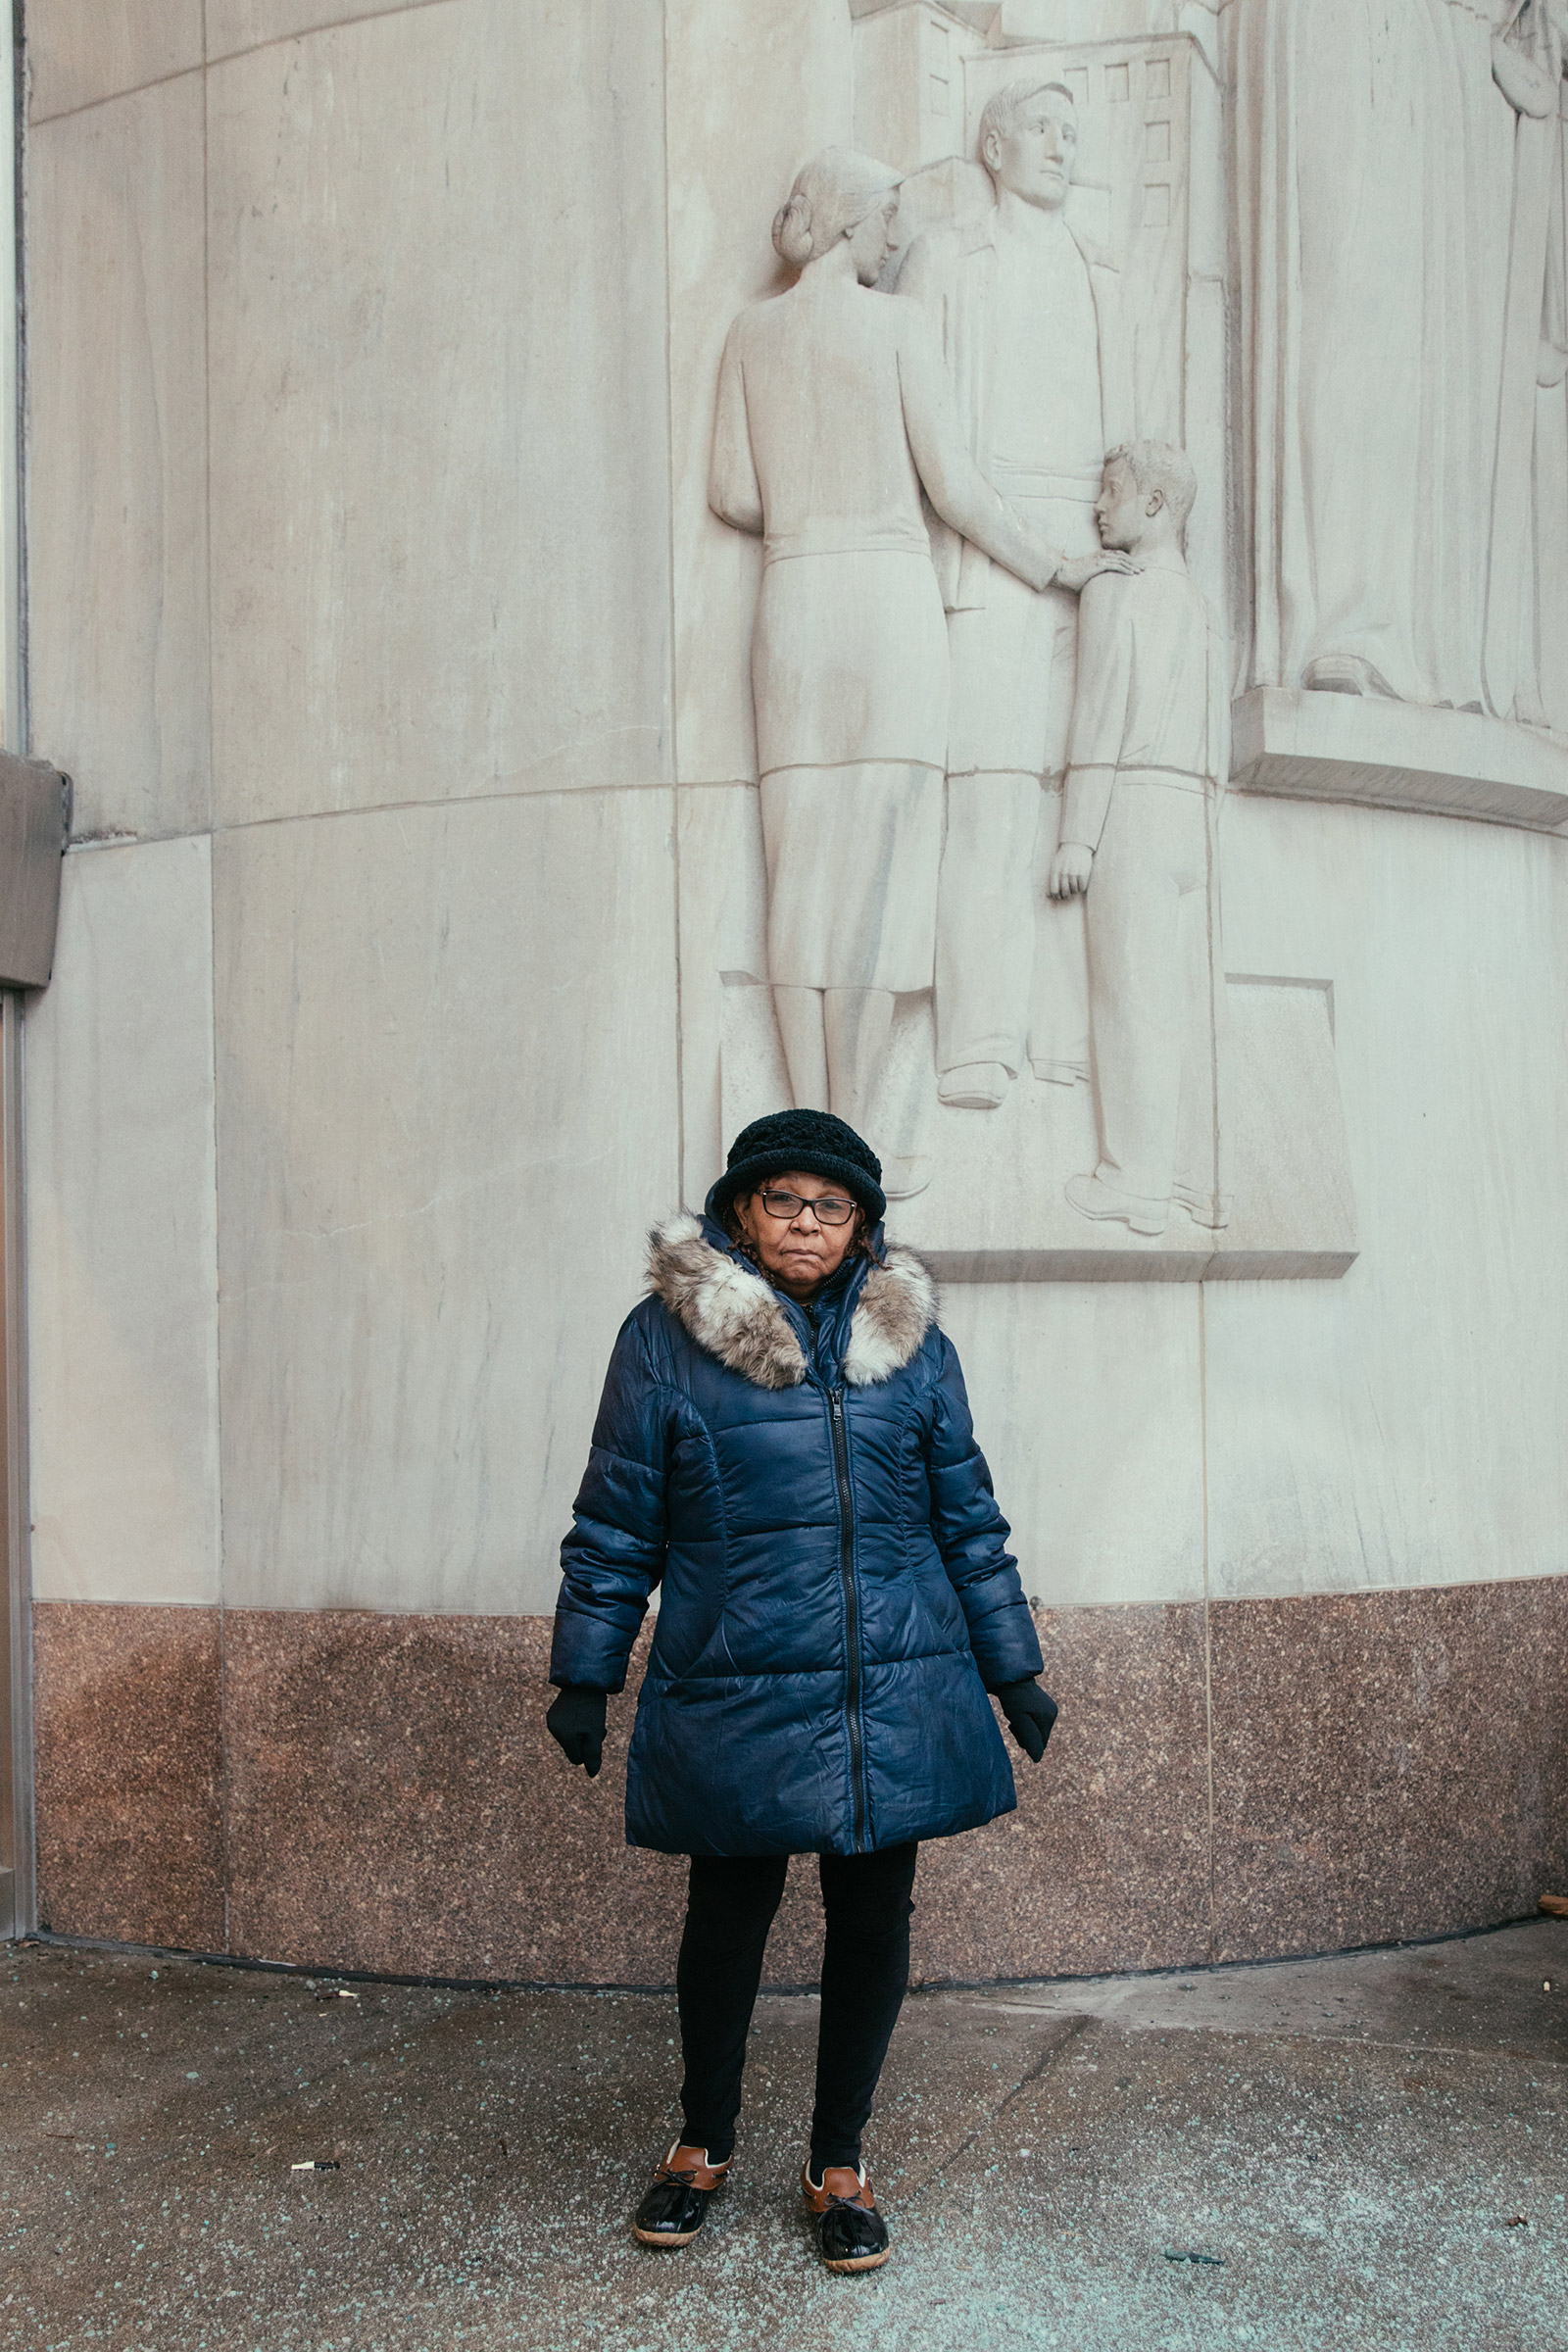 Eleanor Leonard, outside of the Kings County Supreme Court in Brooklyn, New York on Feb. 15, 2021. (Mark Clennon for TIME)